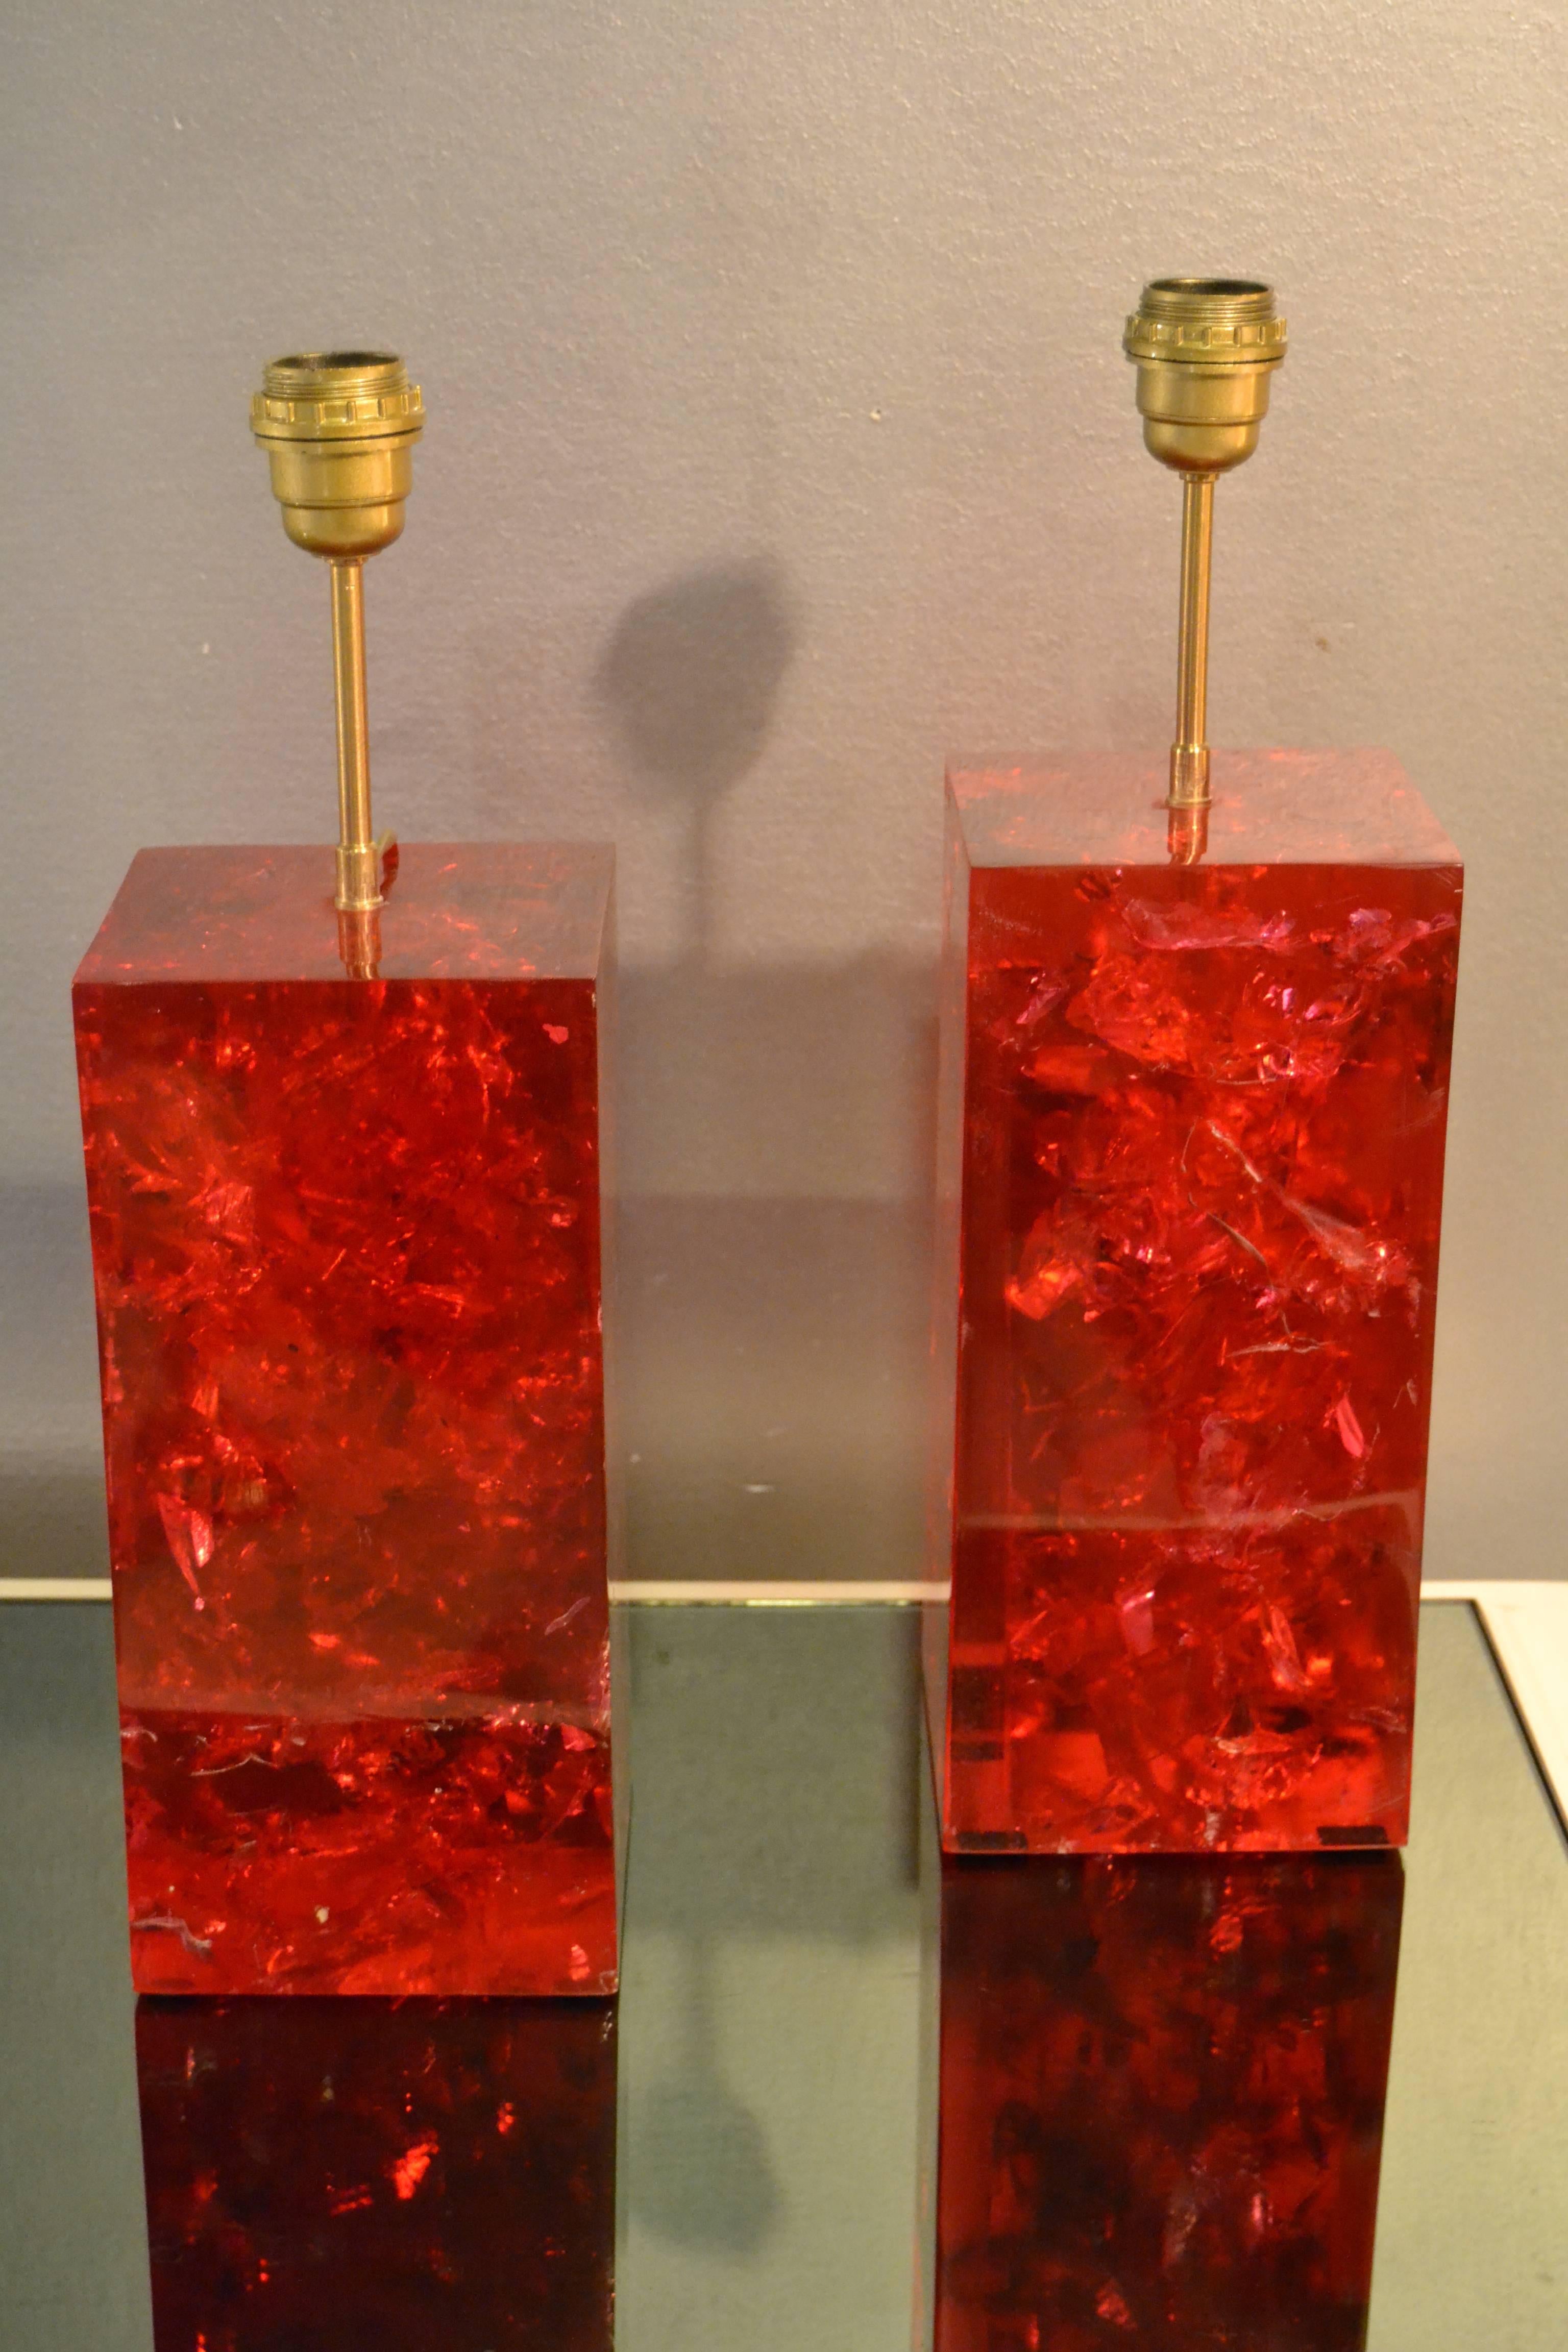 Pair of large resin fractal lamps, France, 1970
great vintage condition
Measures: Resin base is 15 cm x 15 cm x 33 cm high.